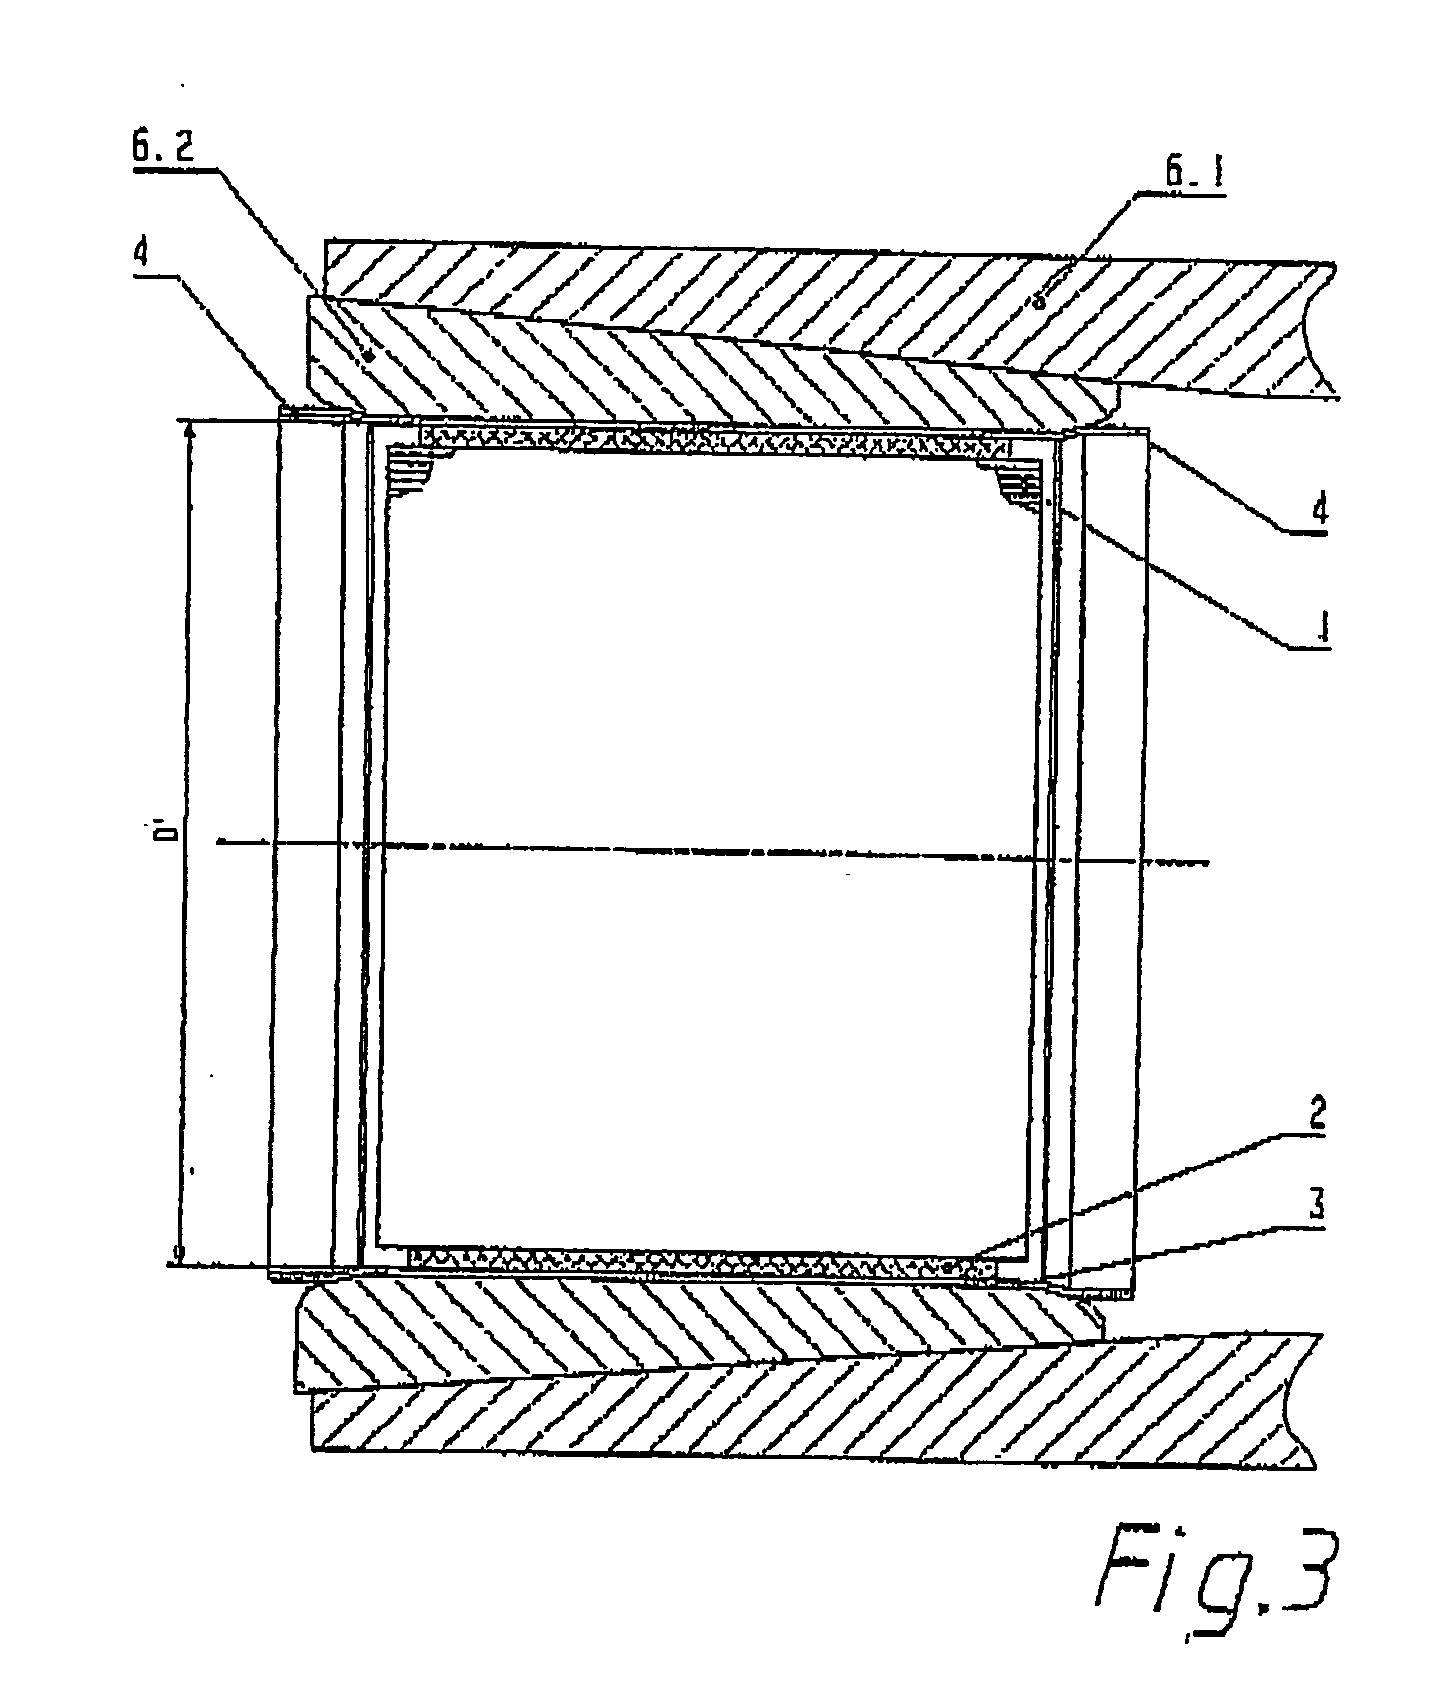 Method for inserting a ceramic functional body in a tubular metal housing and a device thus produced